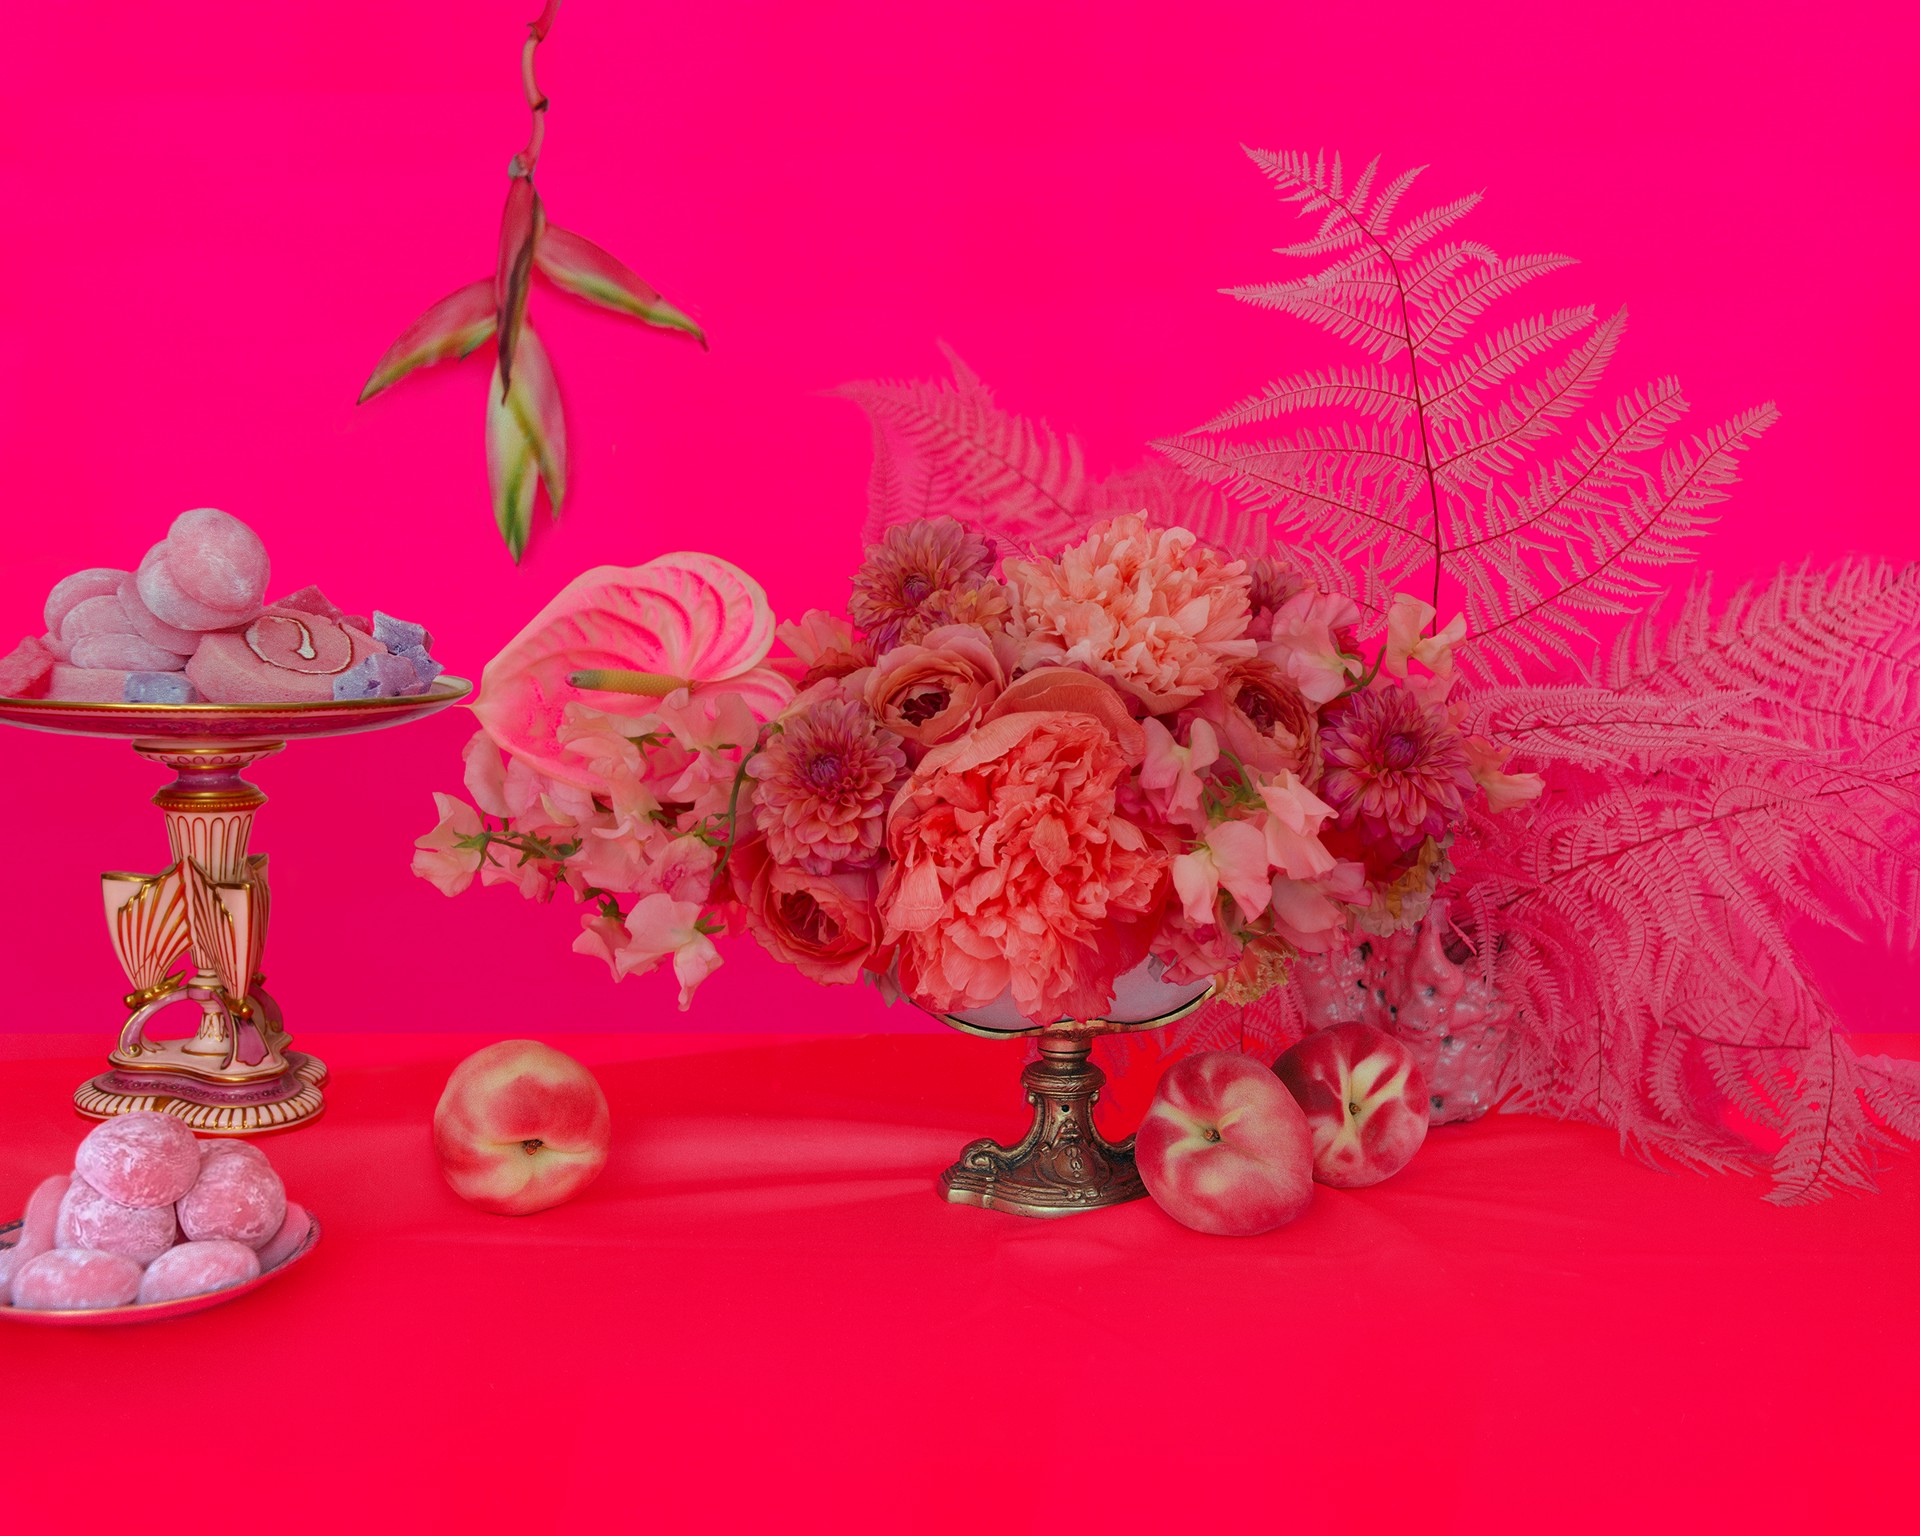 Conceptual Still Life - Pink by Denise Prince